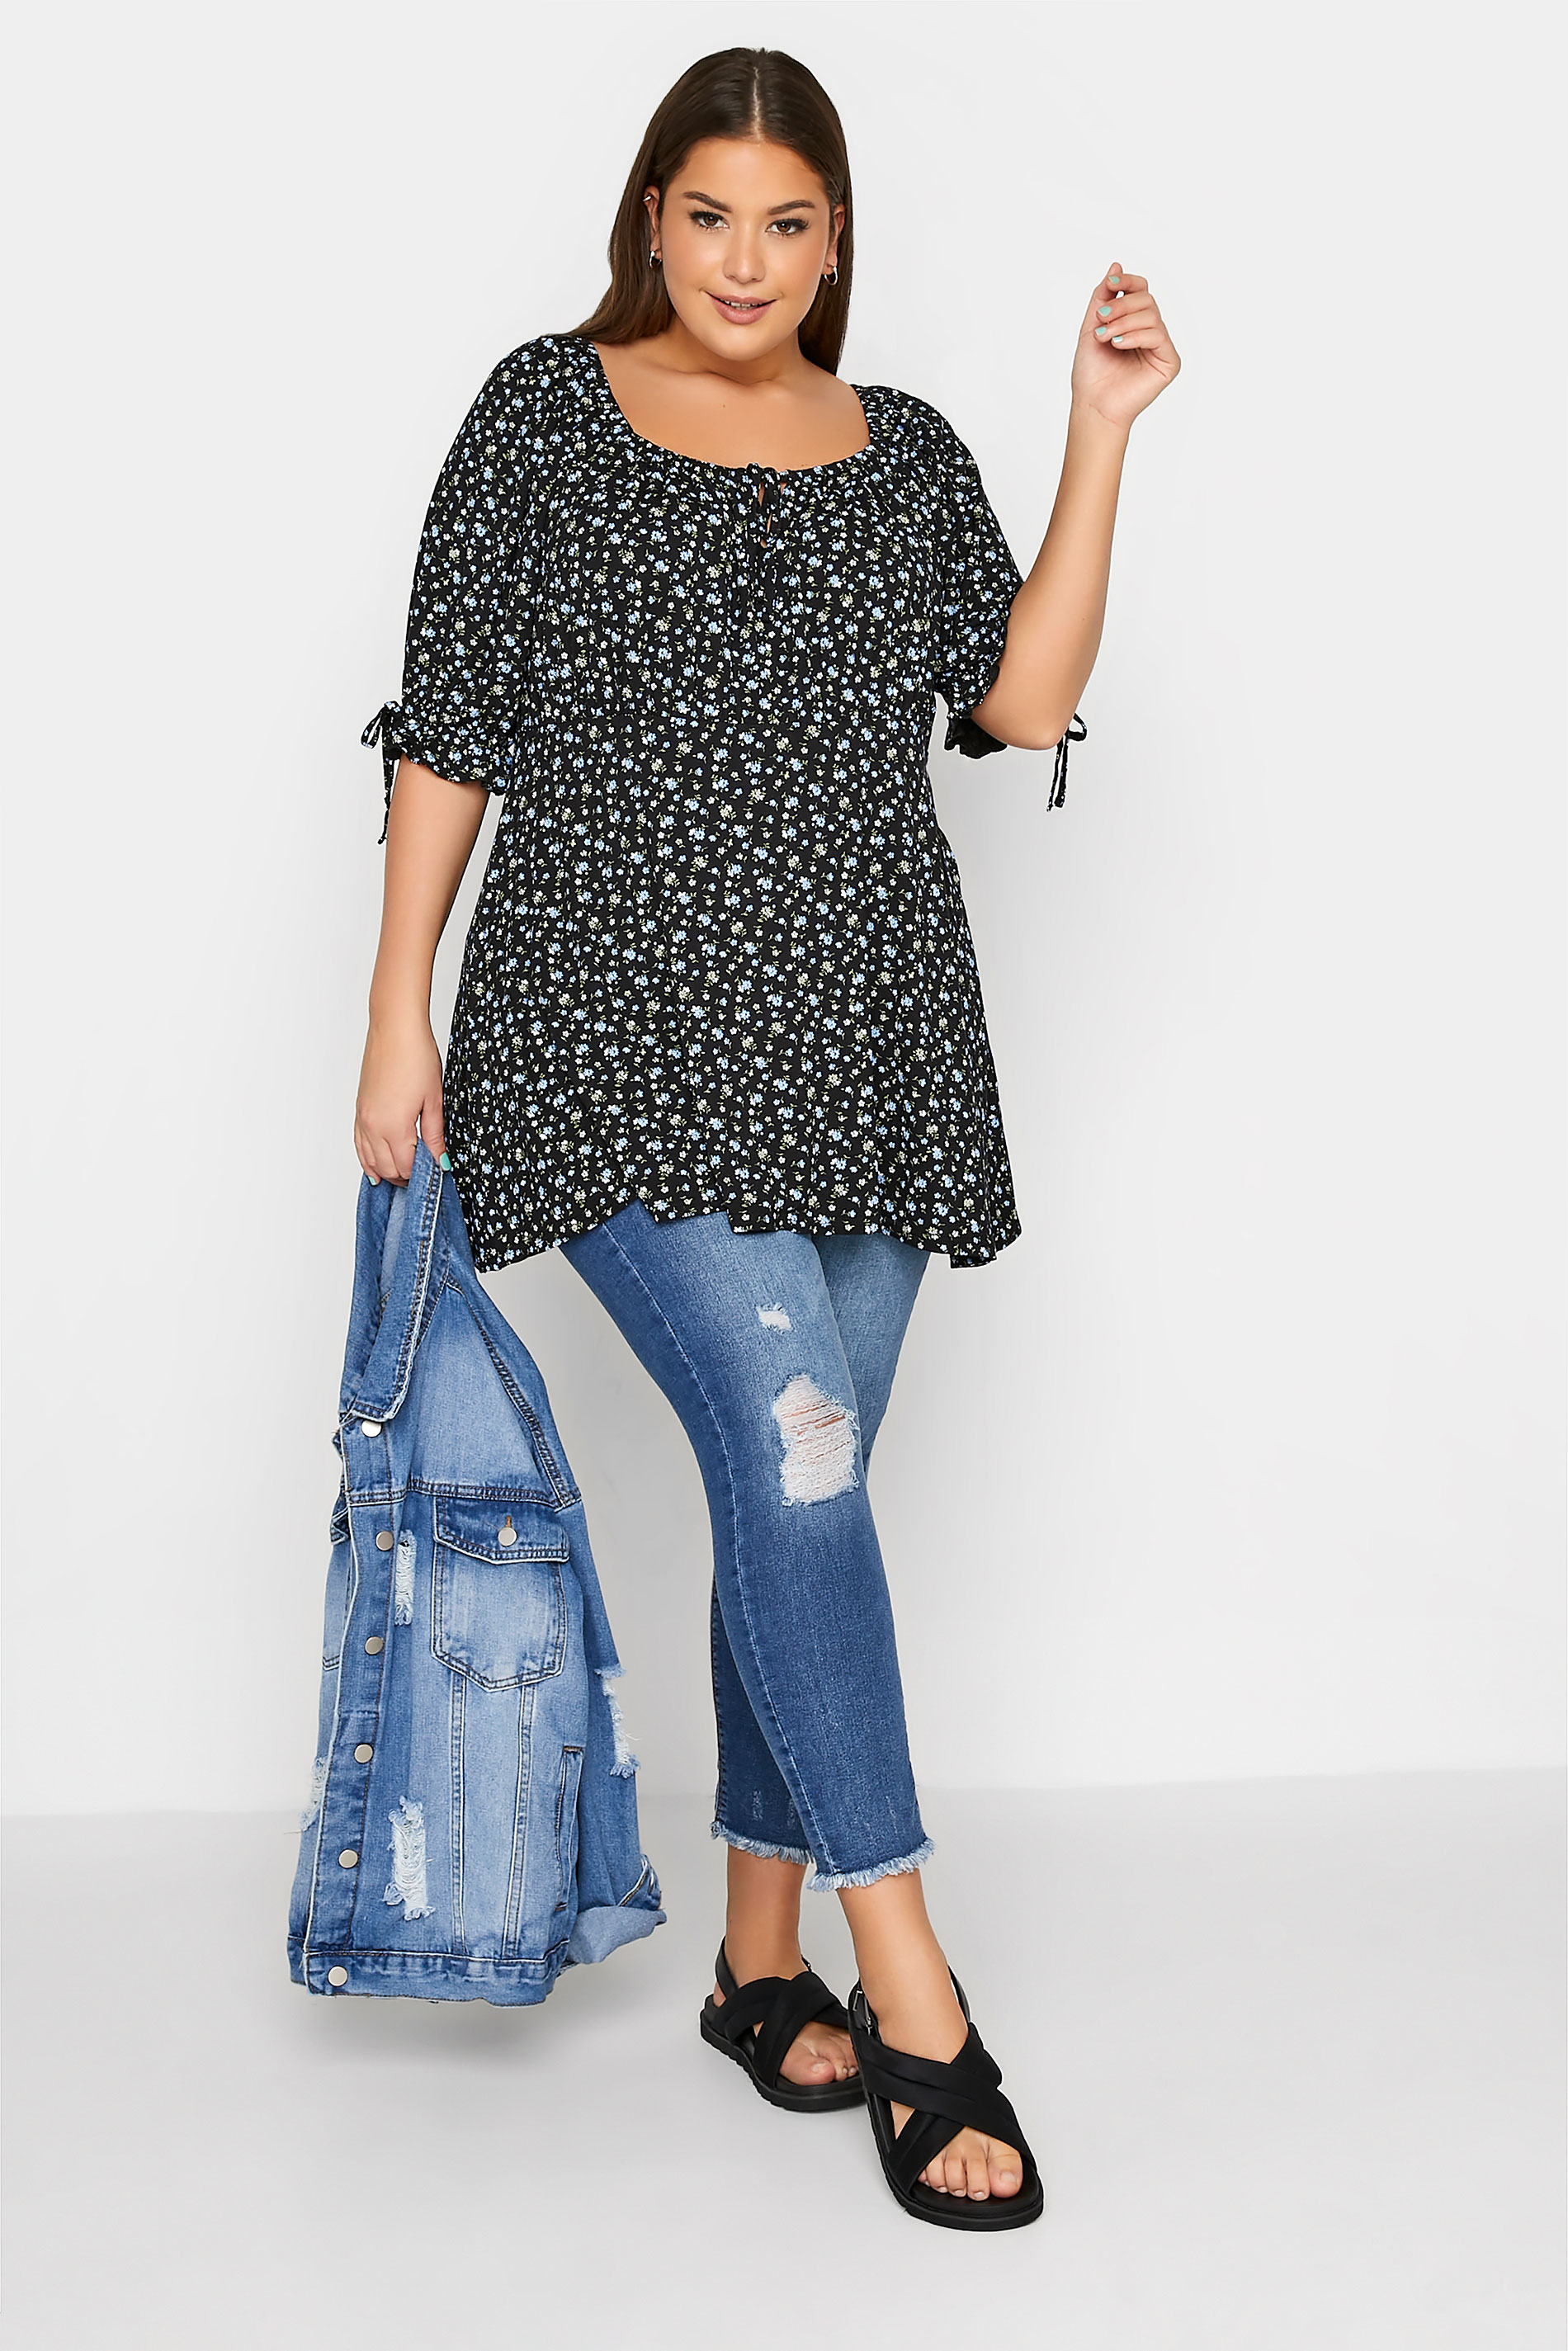 Grande taille  Tops Grande taille  Tops Jersey | LIMITED COLLECTION - Top Noir & Bleu Floral Milkmaid - QI46243